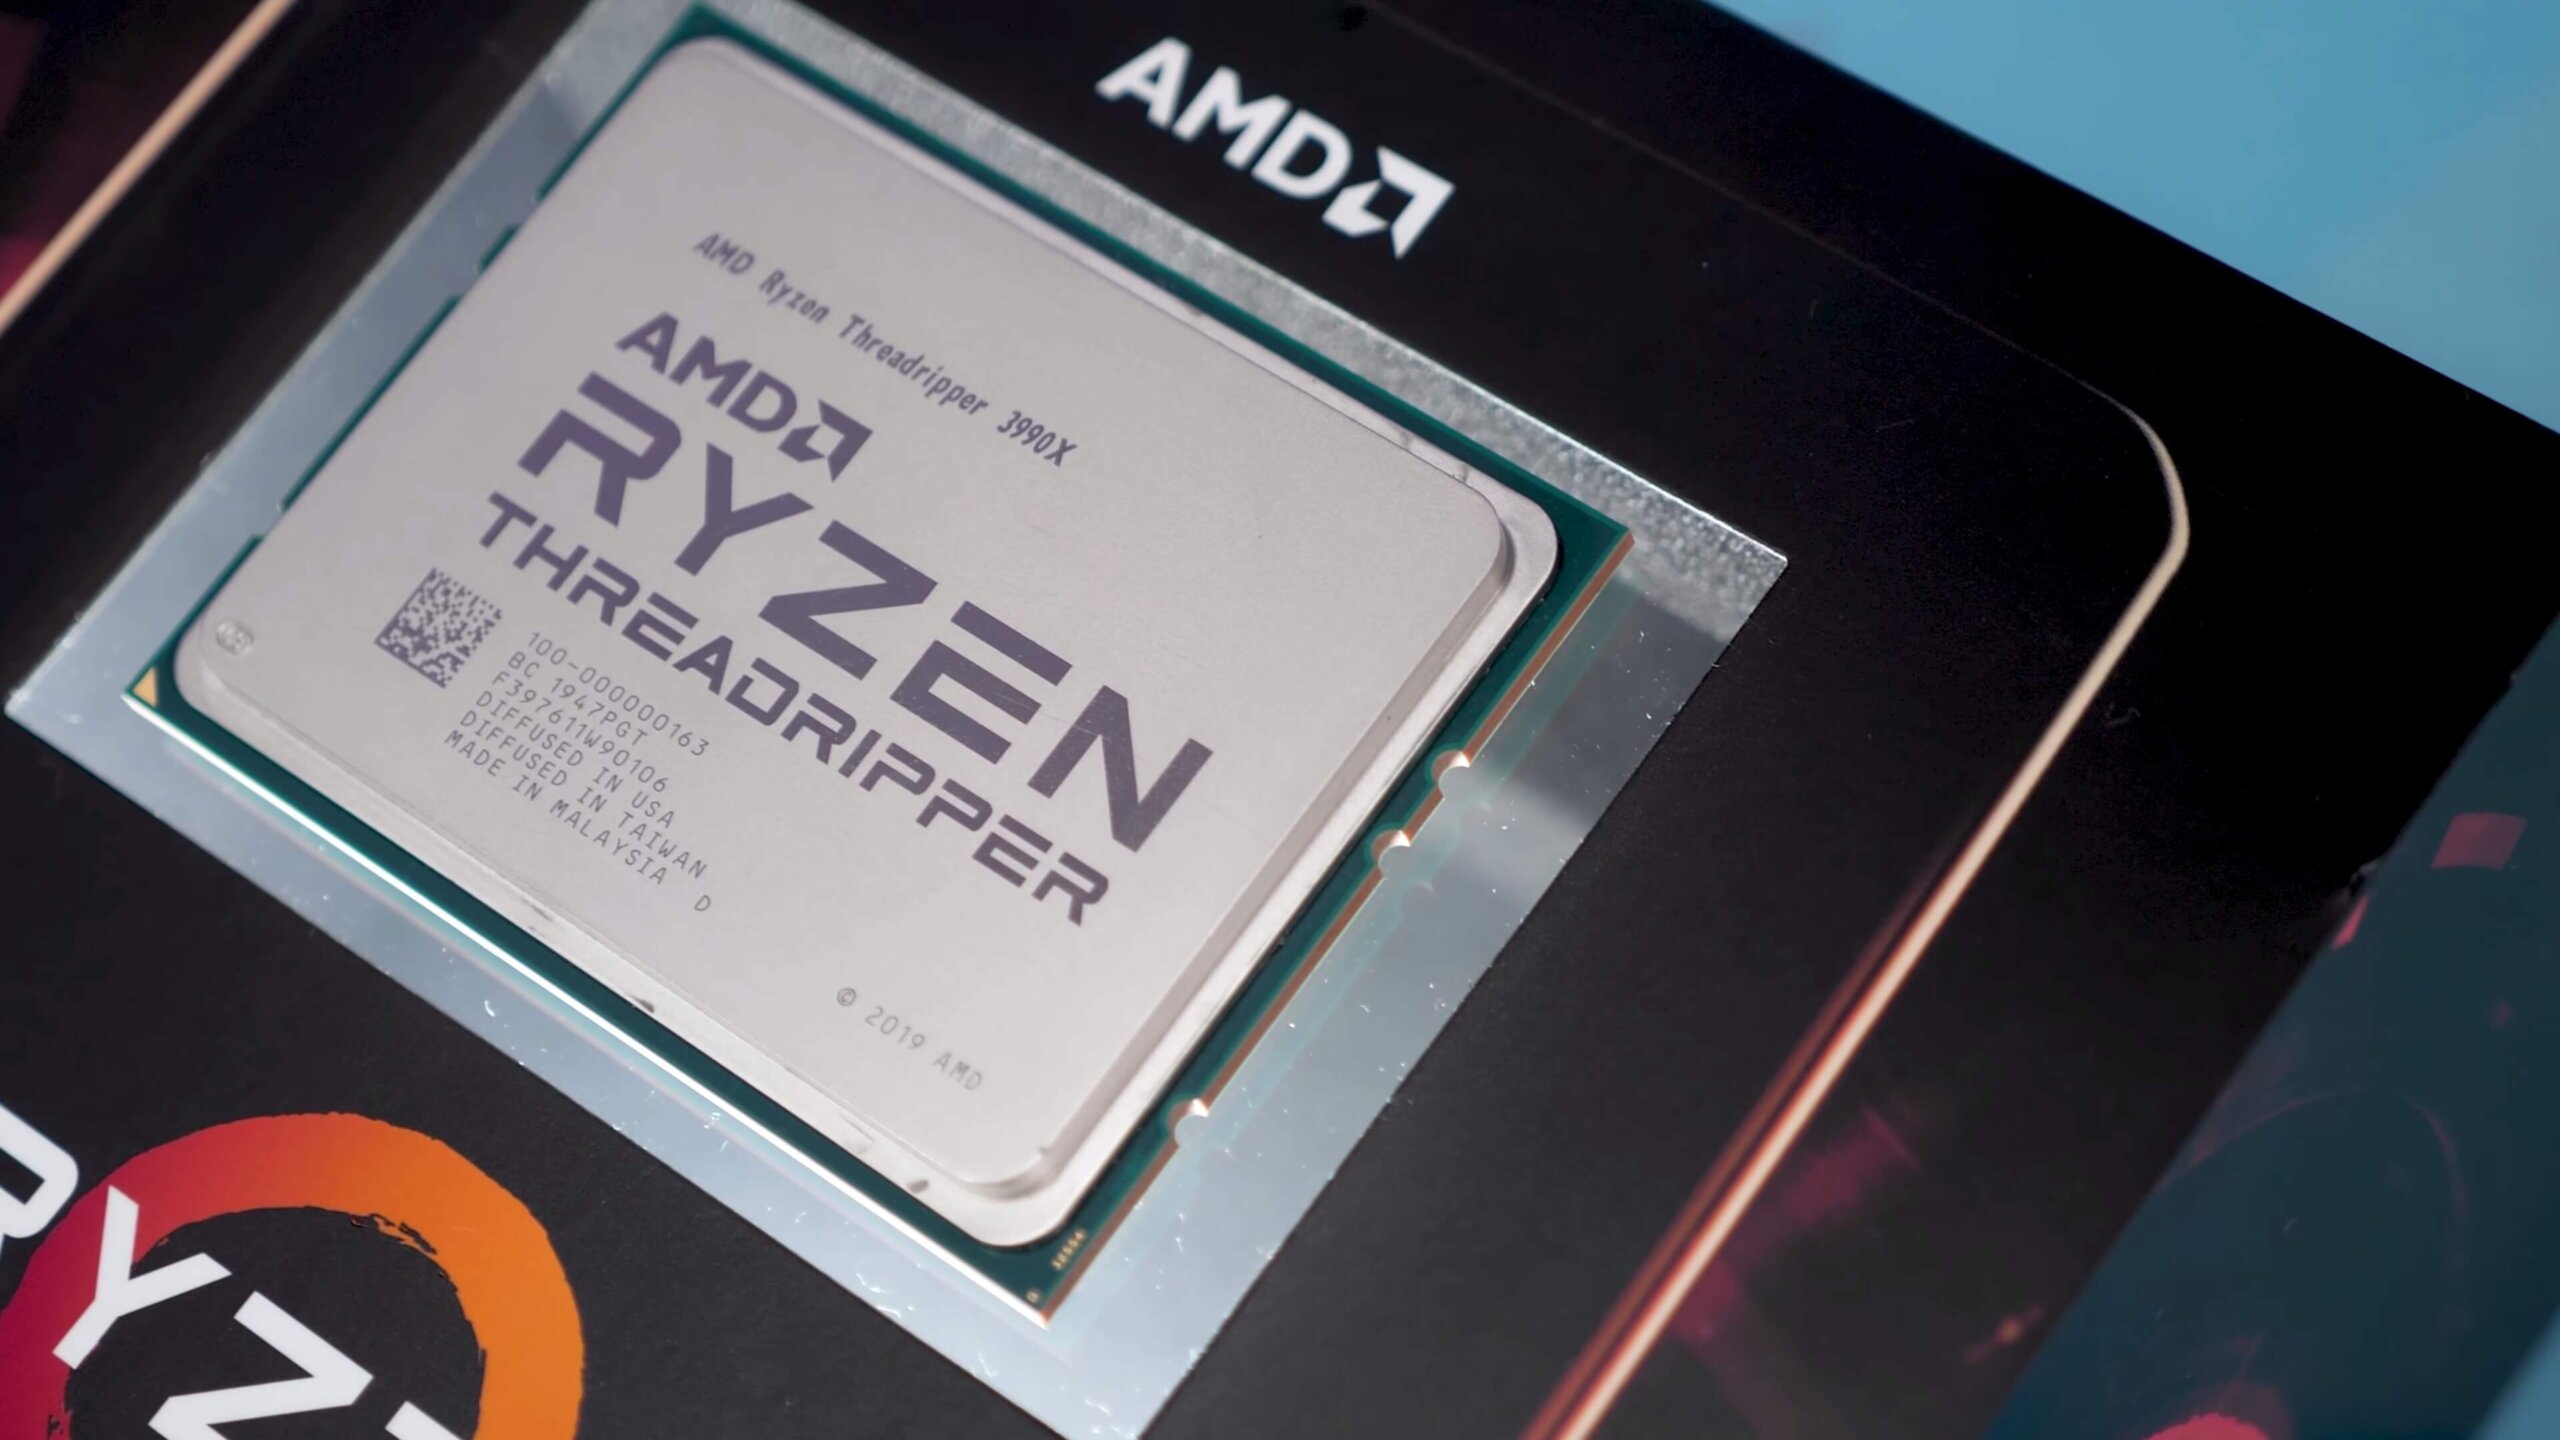 AMD will likely be about to present dual-socket functionality to their Threadripper CPUs